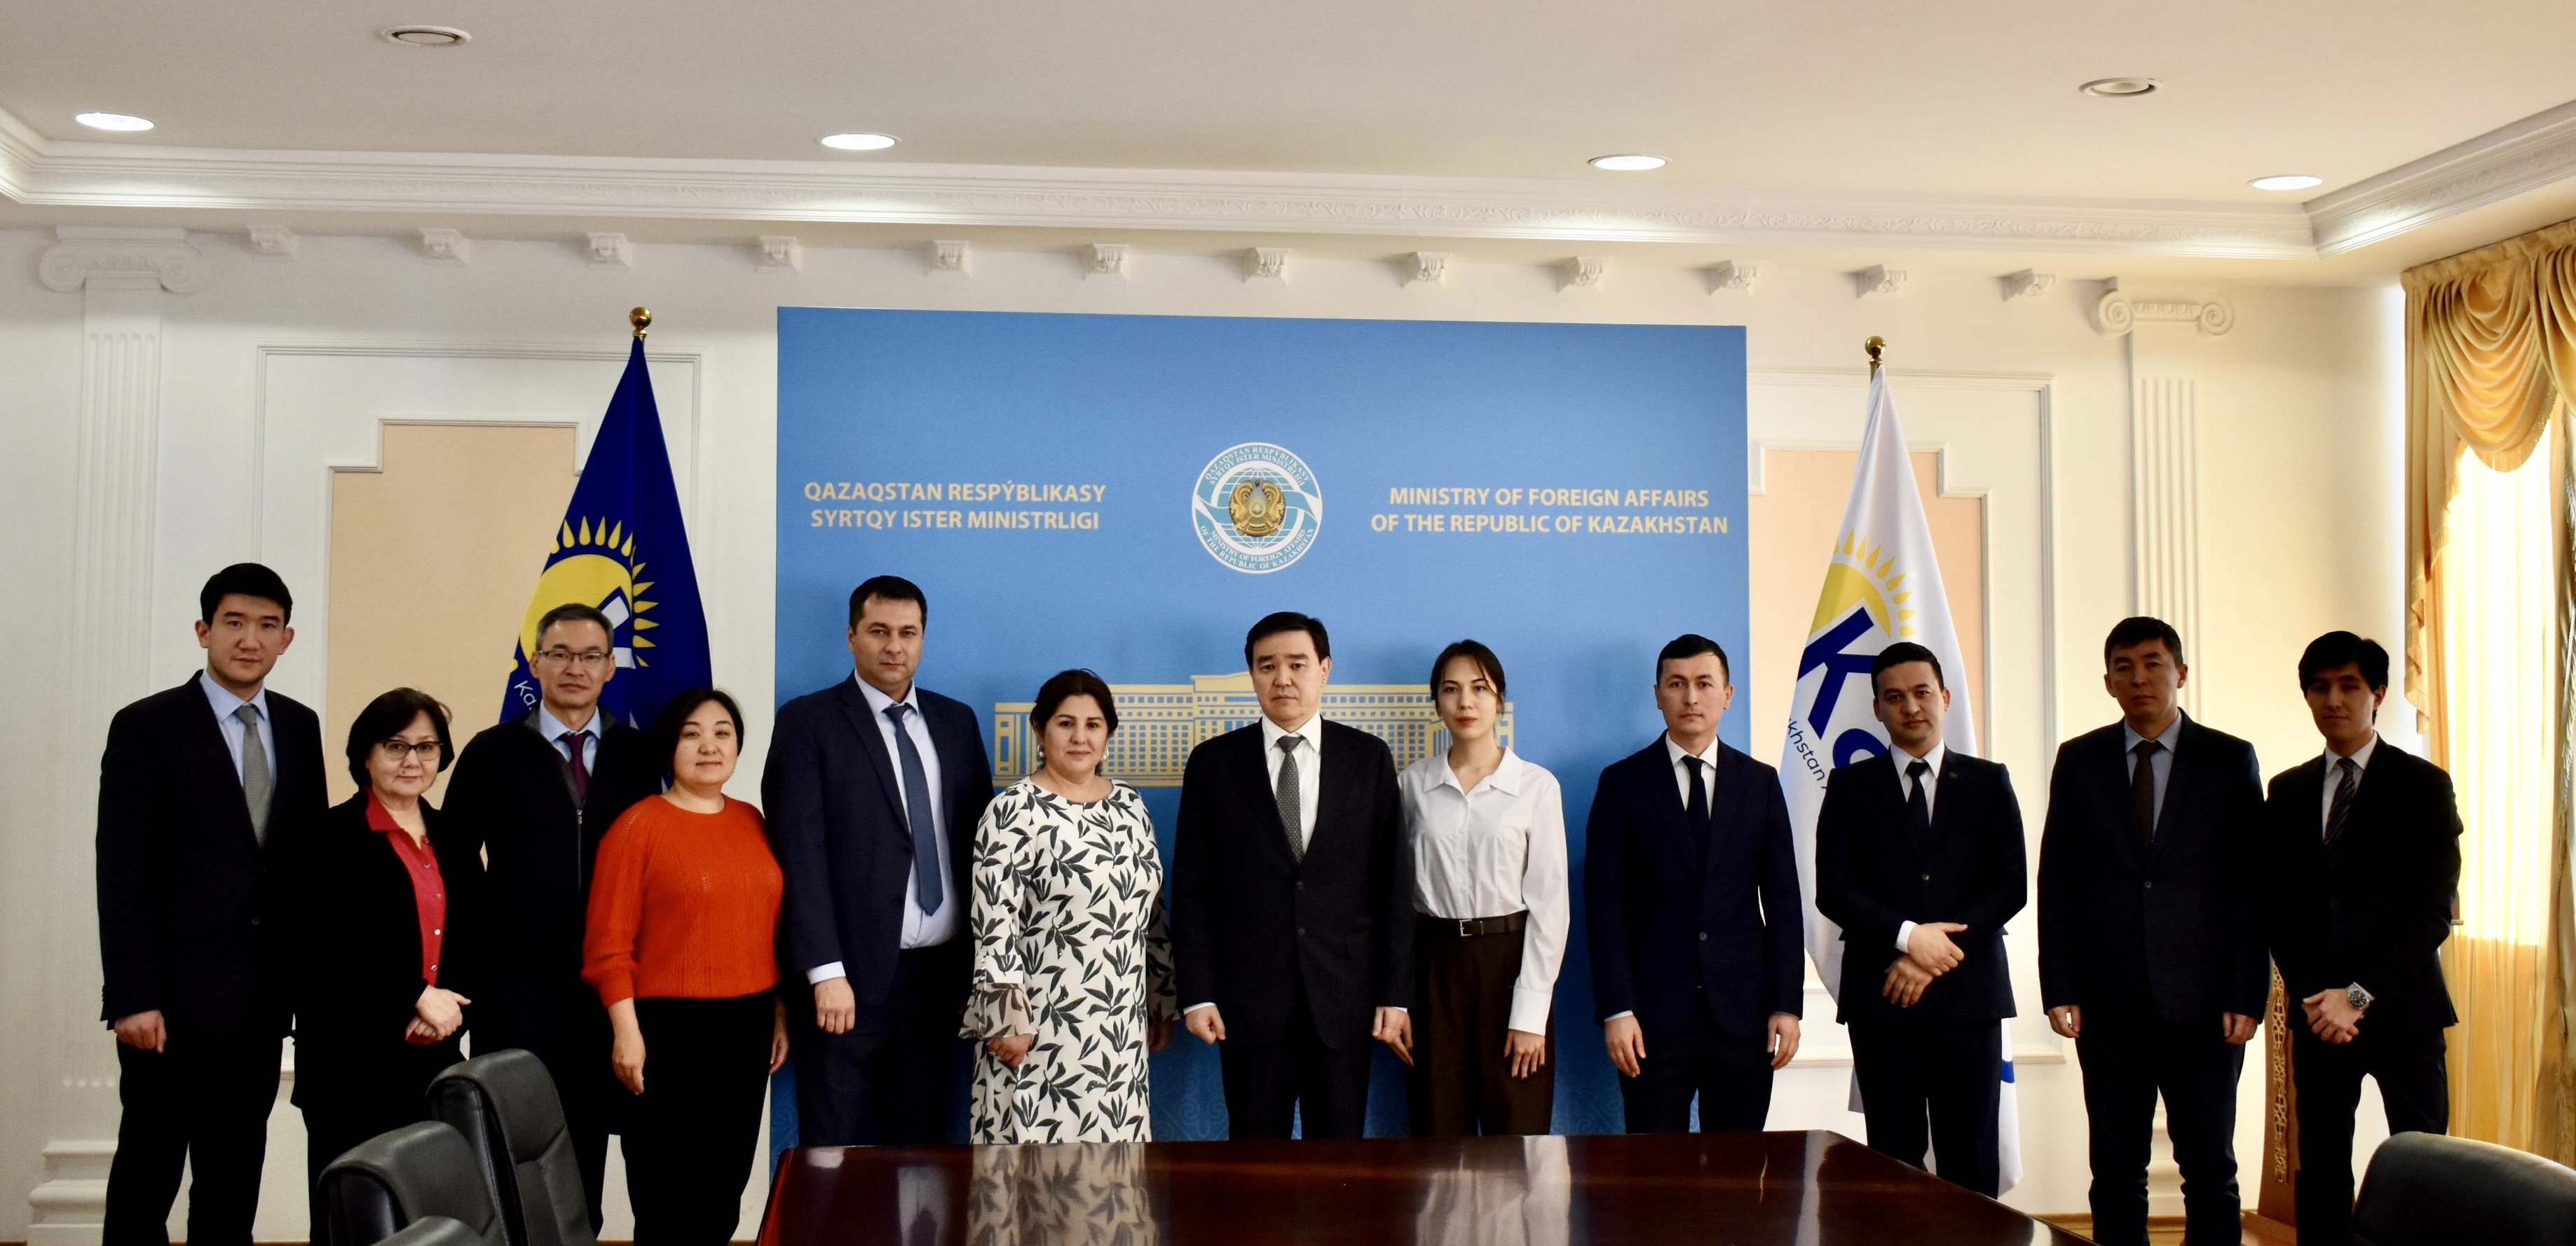 KazAID held a briefing with the participation of Central Asian Embassies